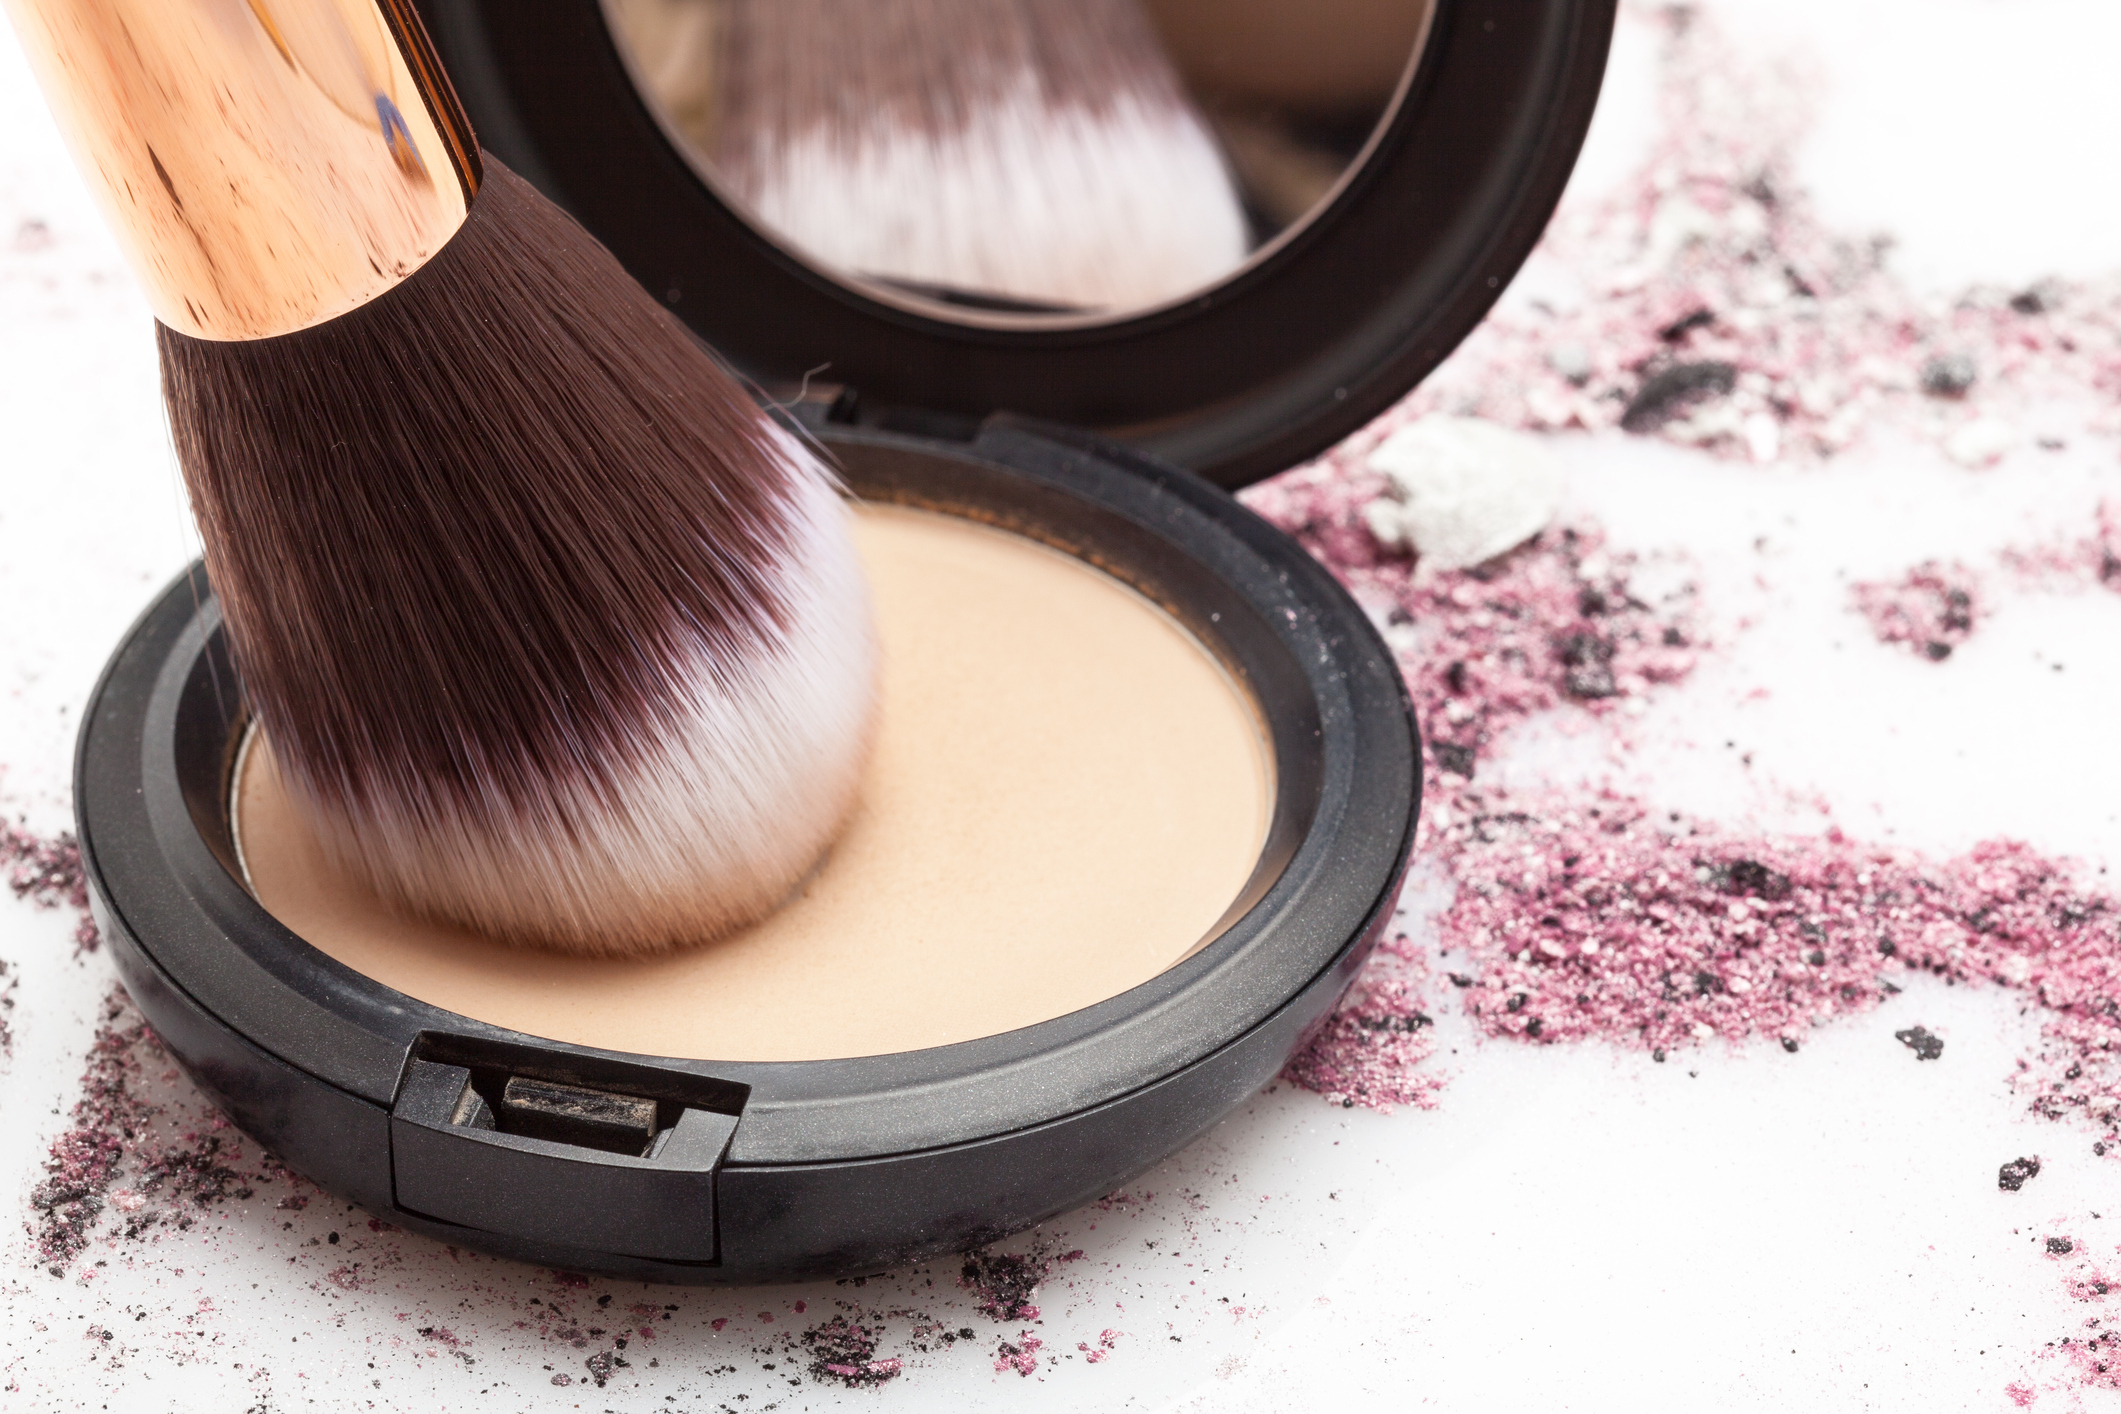 Novi’s Director of Science &amp; Research discusses
benefits and drawbacks of natural preservatives in cosmetic
products